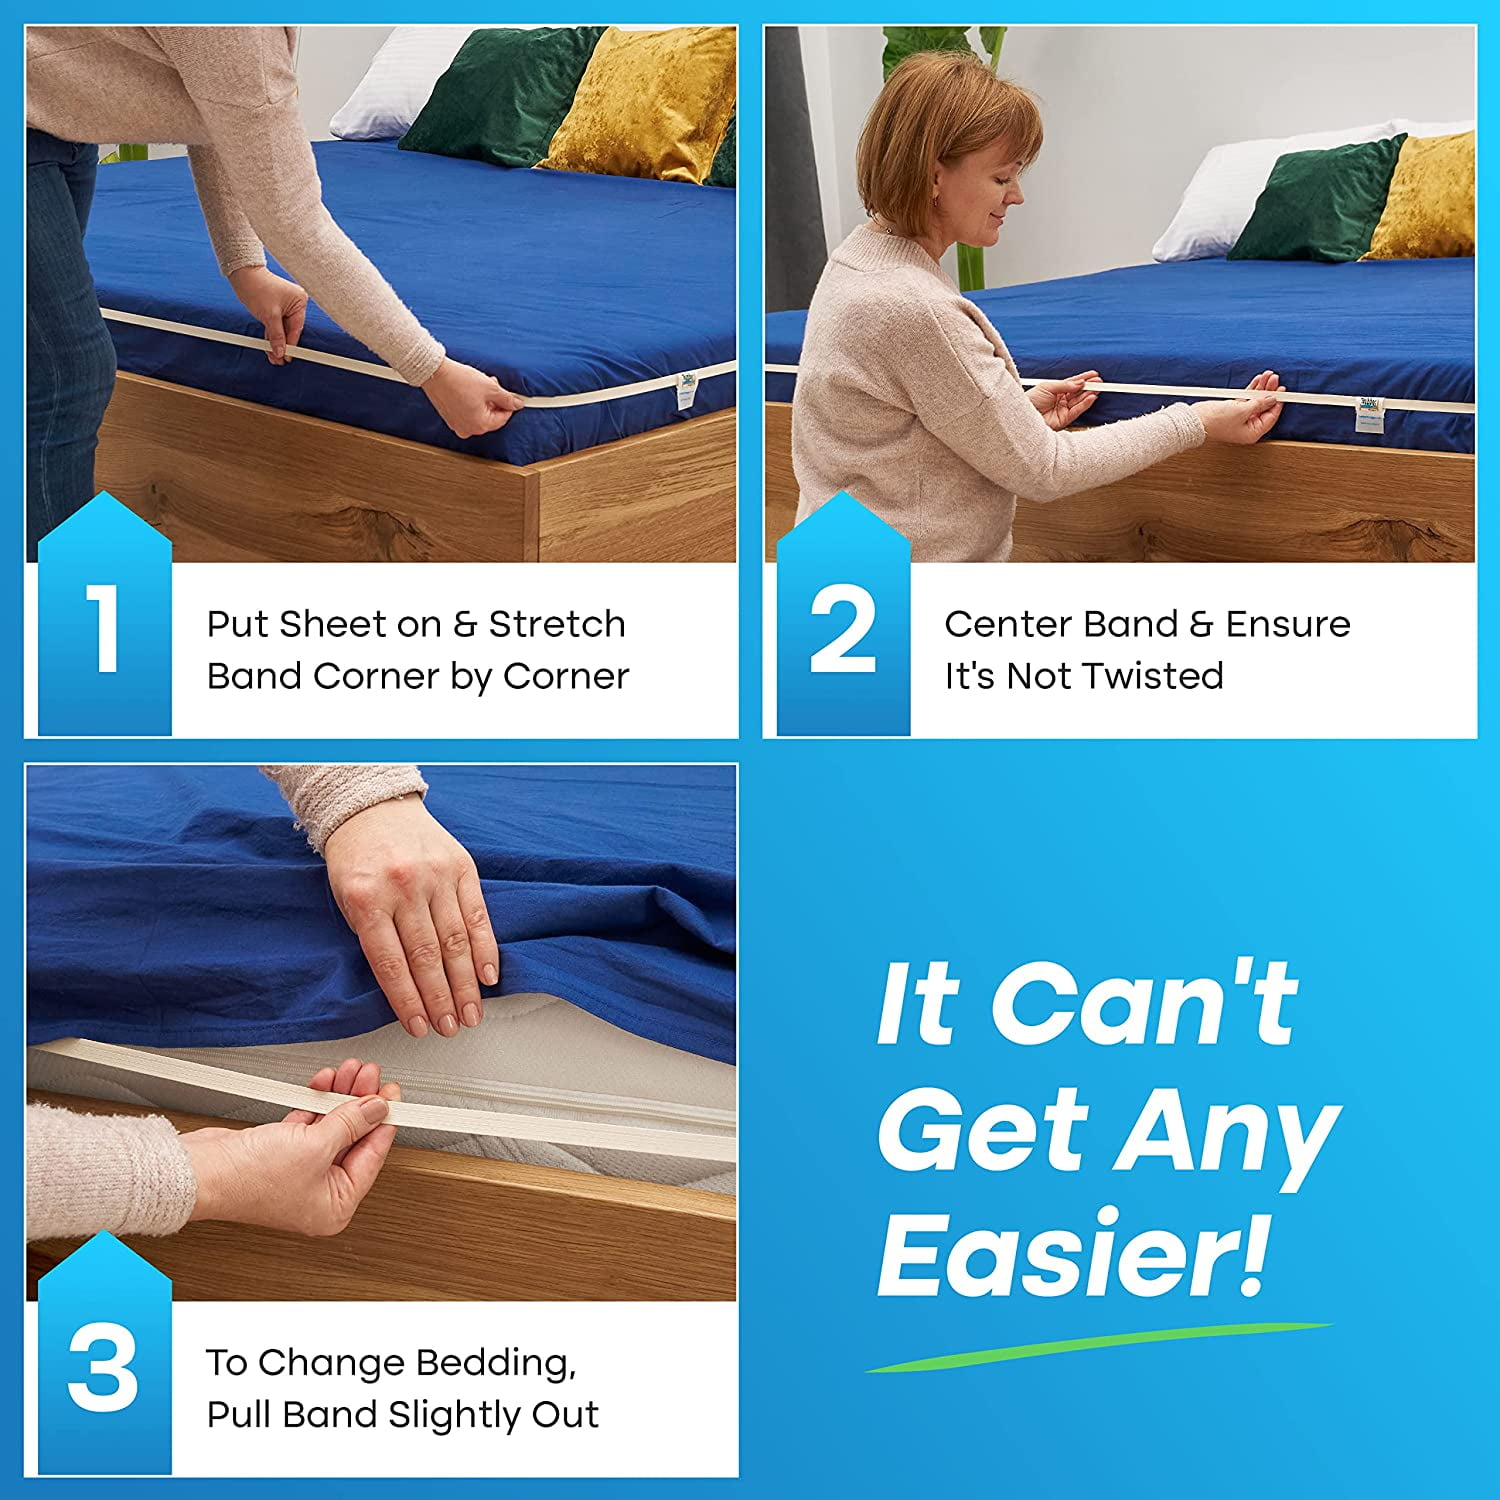  Bed Sheet Holder  One Elastic Band with Fastener fits All  Mattress Sizes! A Strap Holds Your Sheet Tight to The Mattress. No Loose  Straps, Sheet Clips, Grippers, or Sheet Suspenders. 